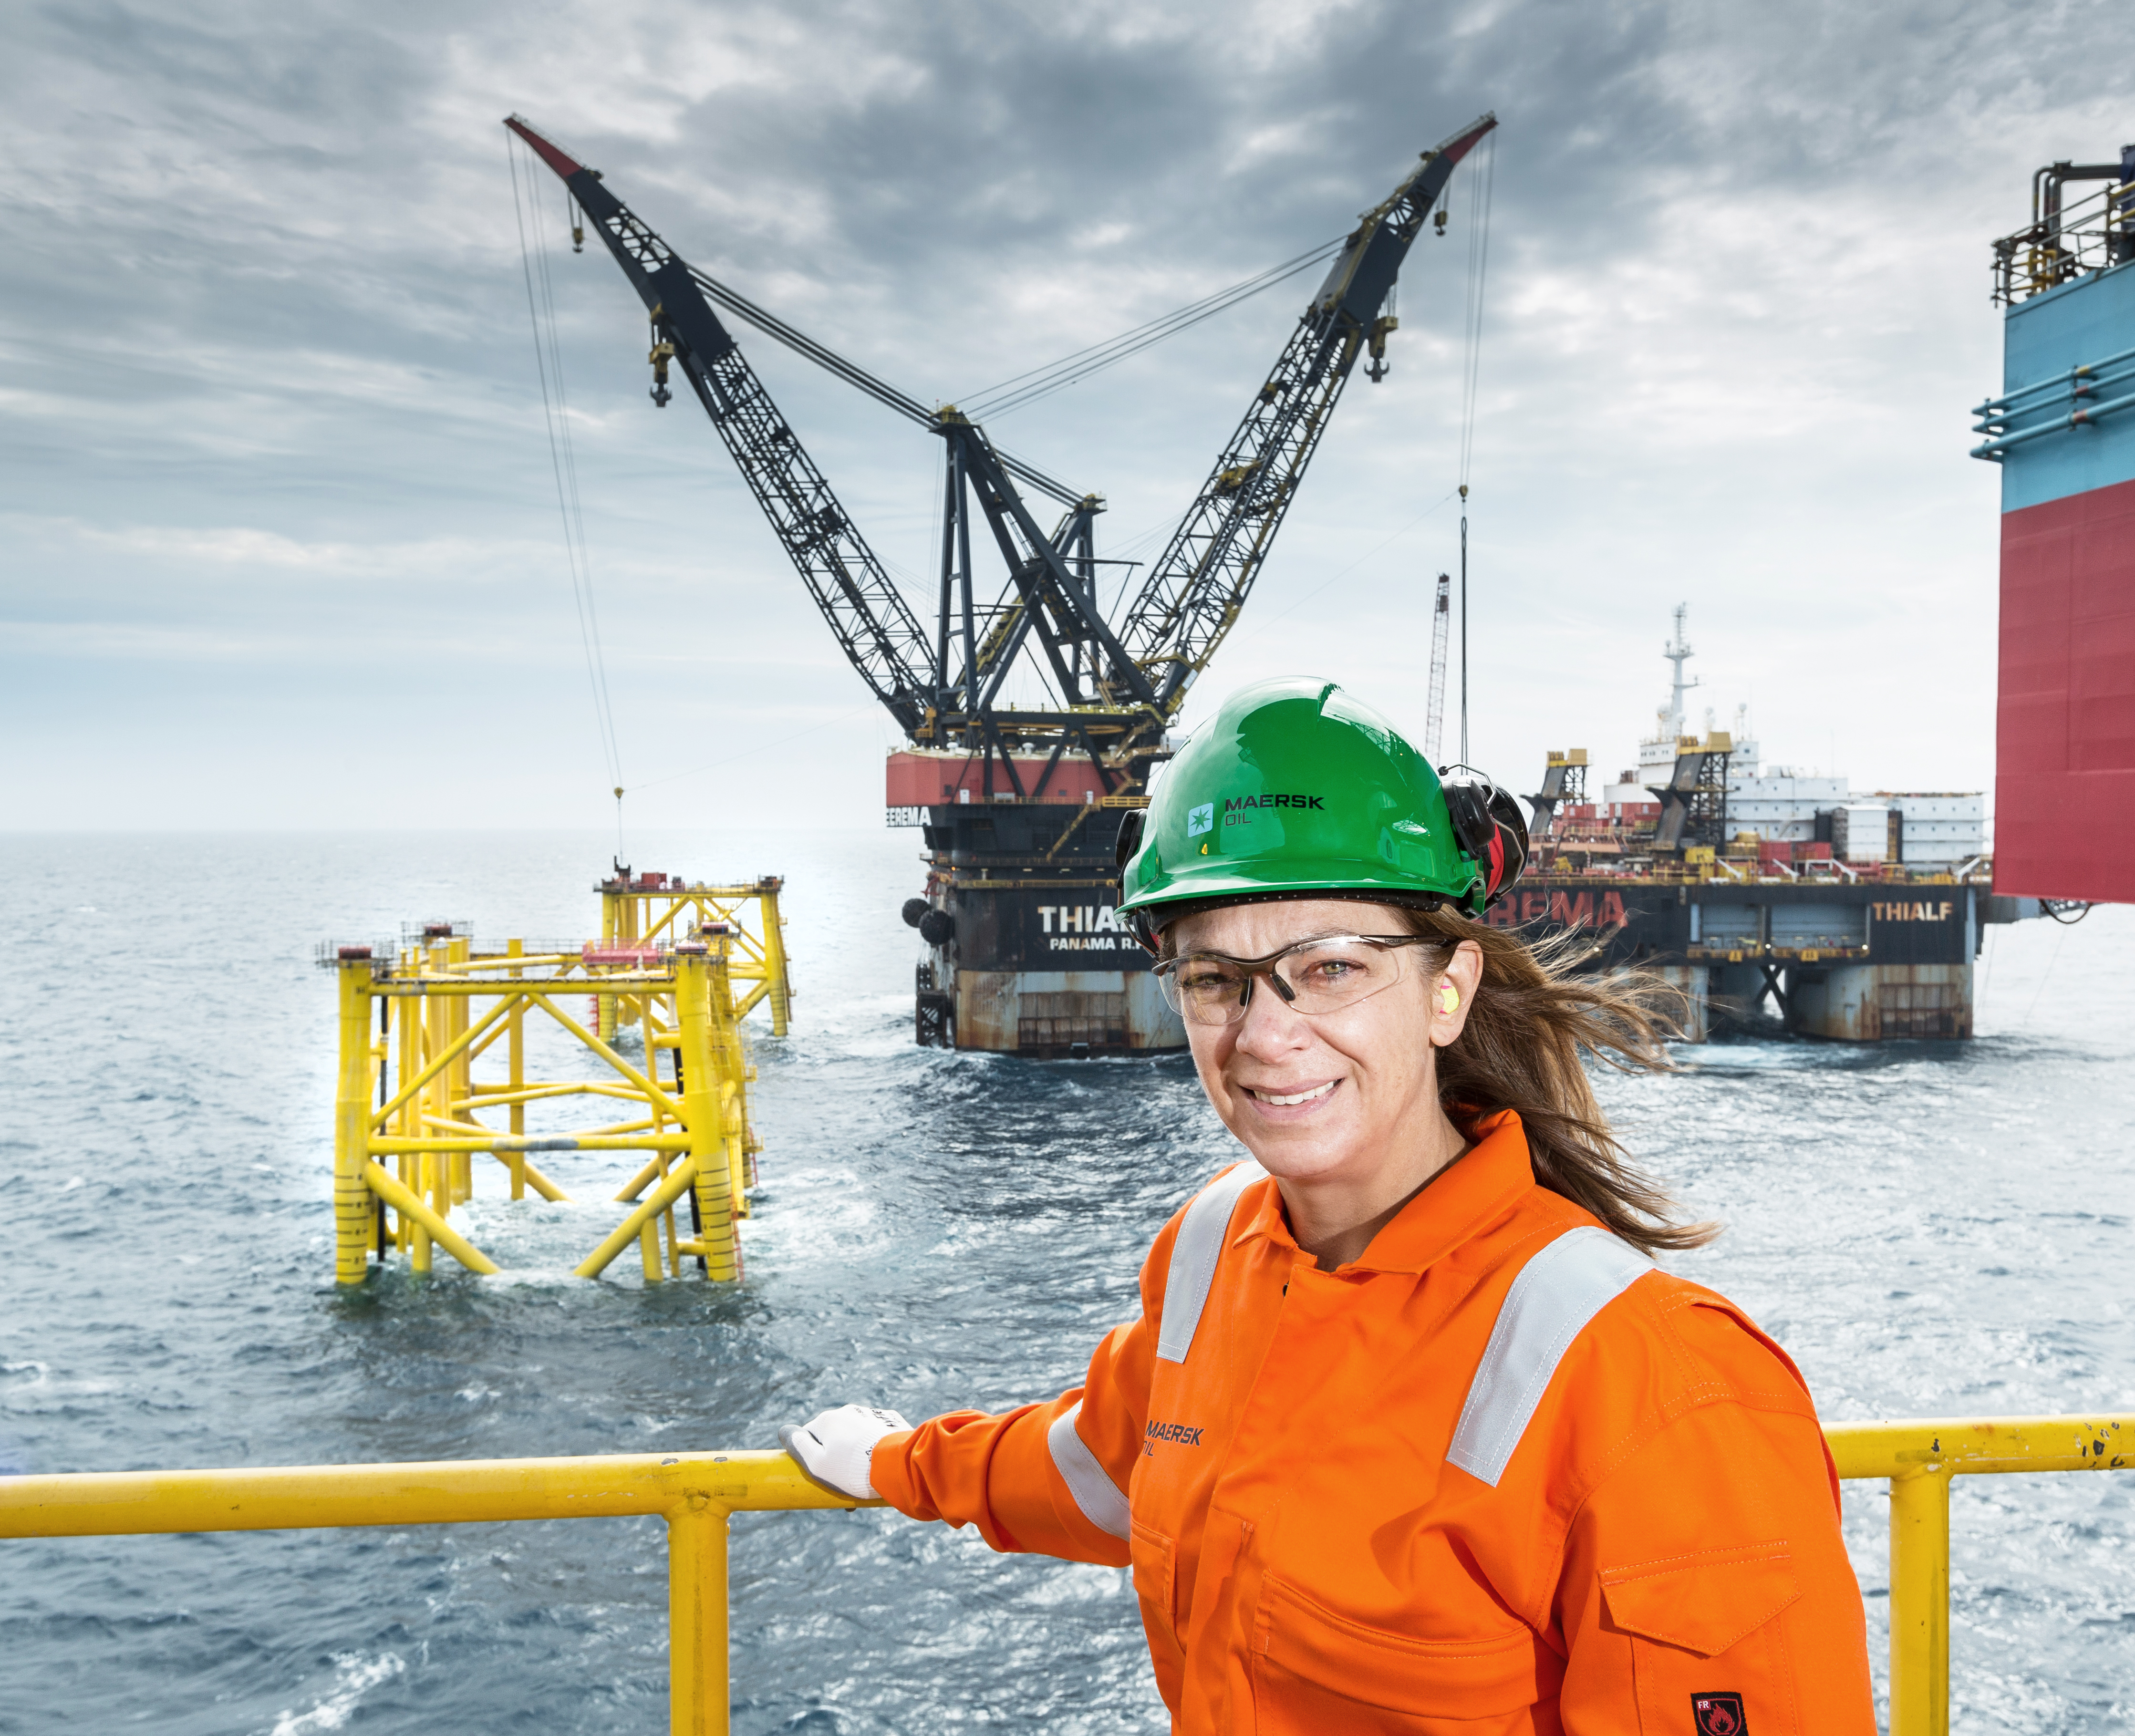 ABERDEEN - The number of workers on offshore oil and gas installations decr...